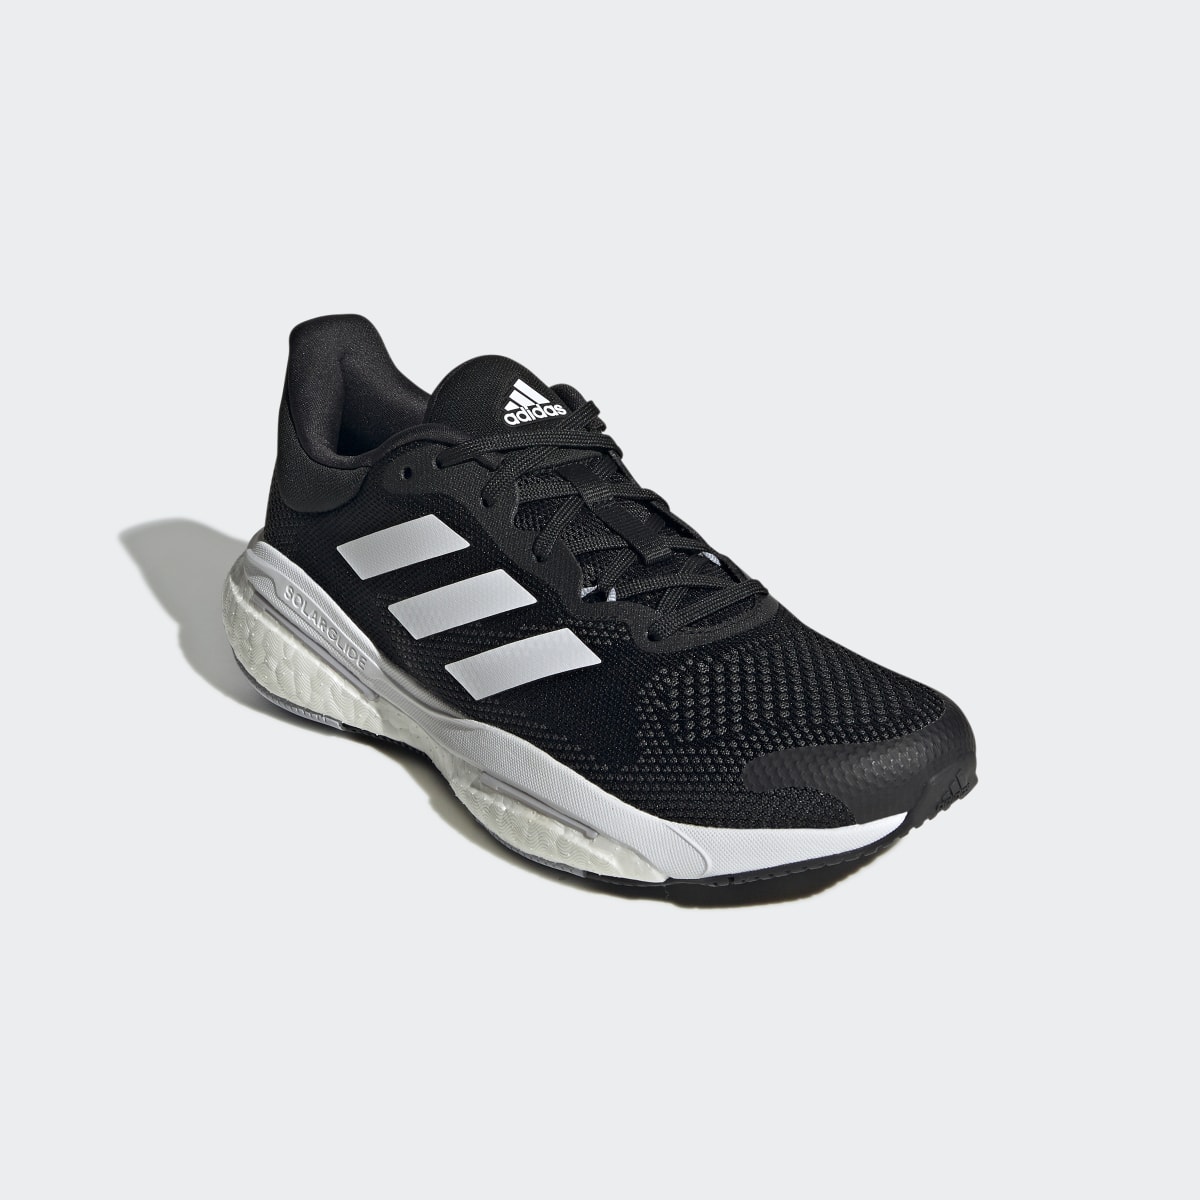 Adidas Solarglide 5 Shoes. 5